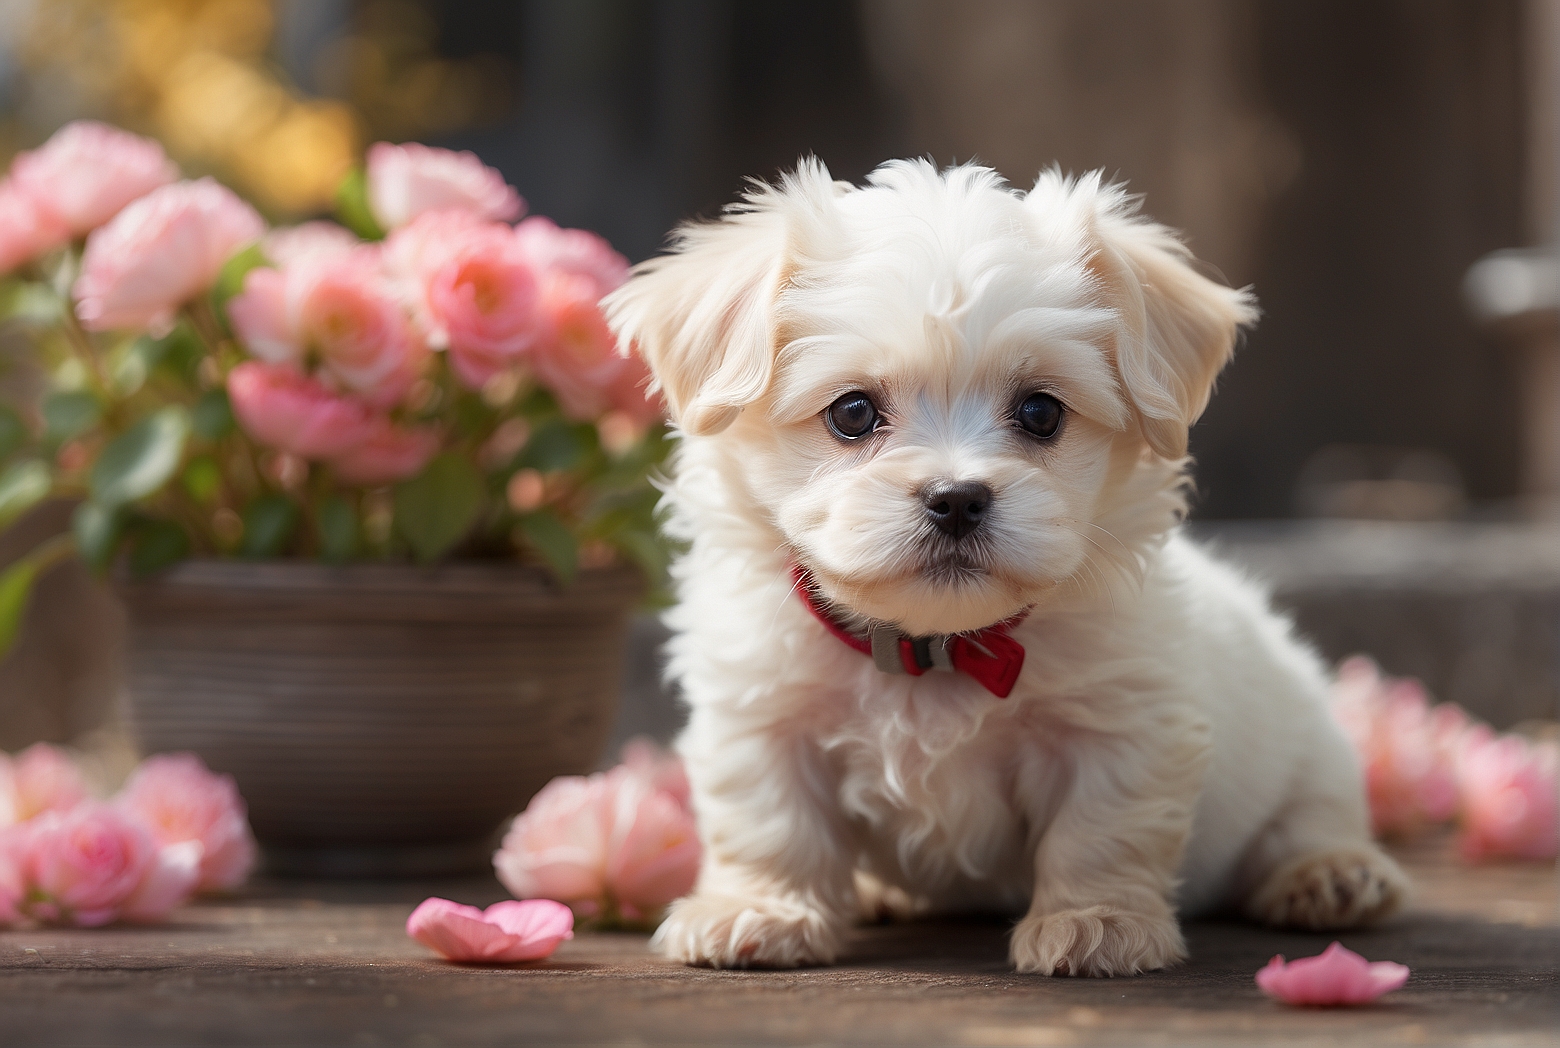 How Much Does a Maltese Puppy Cost?